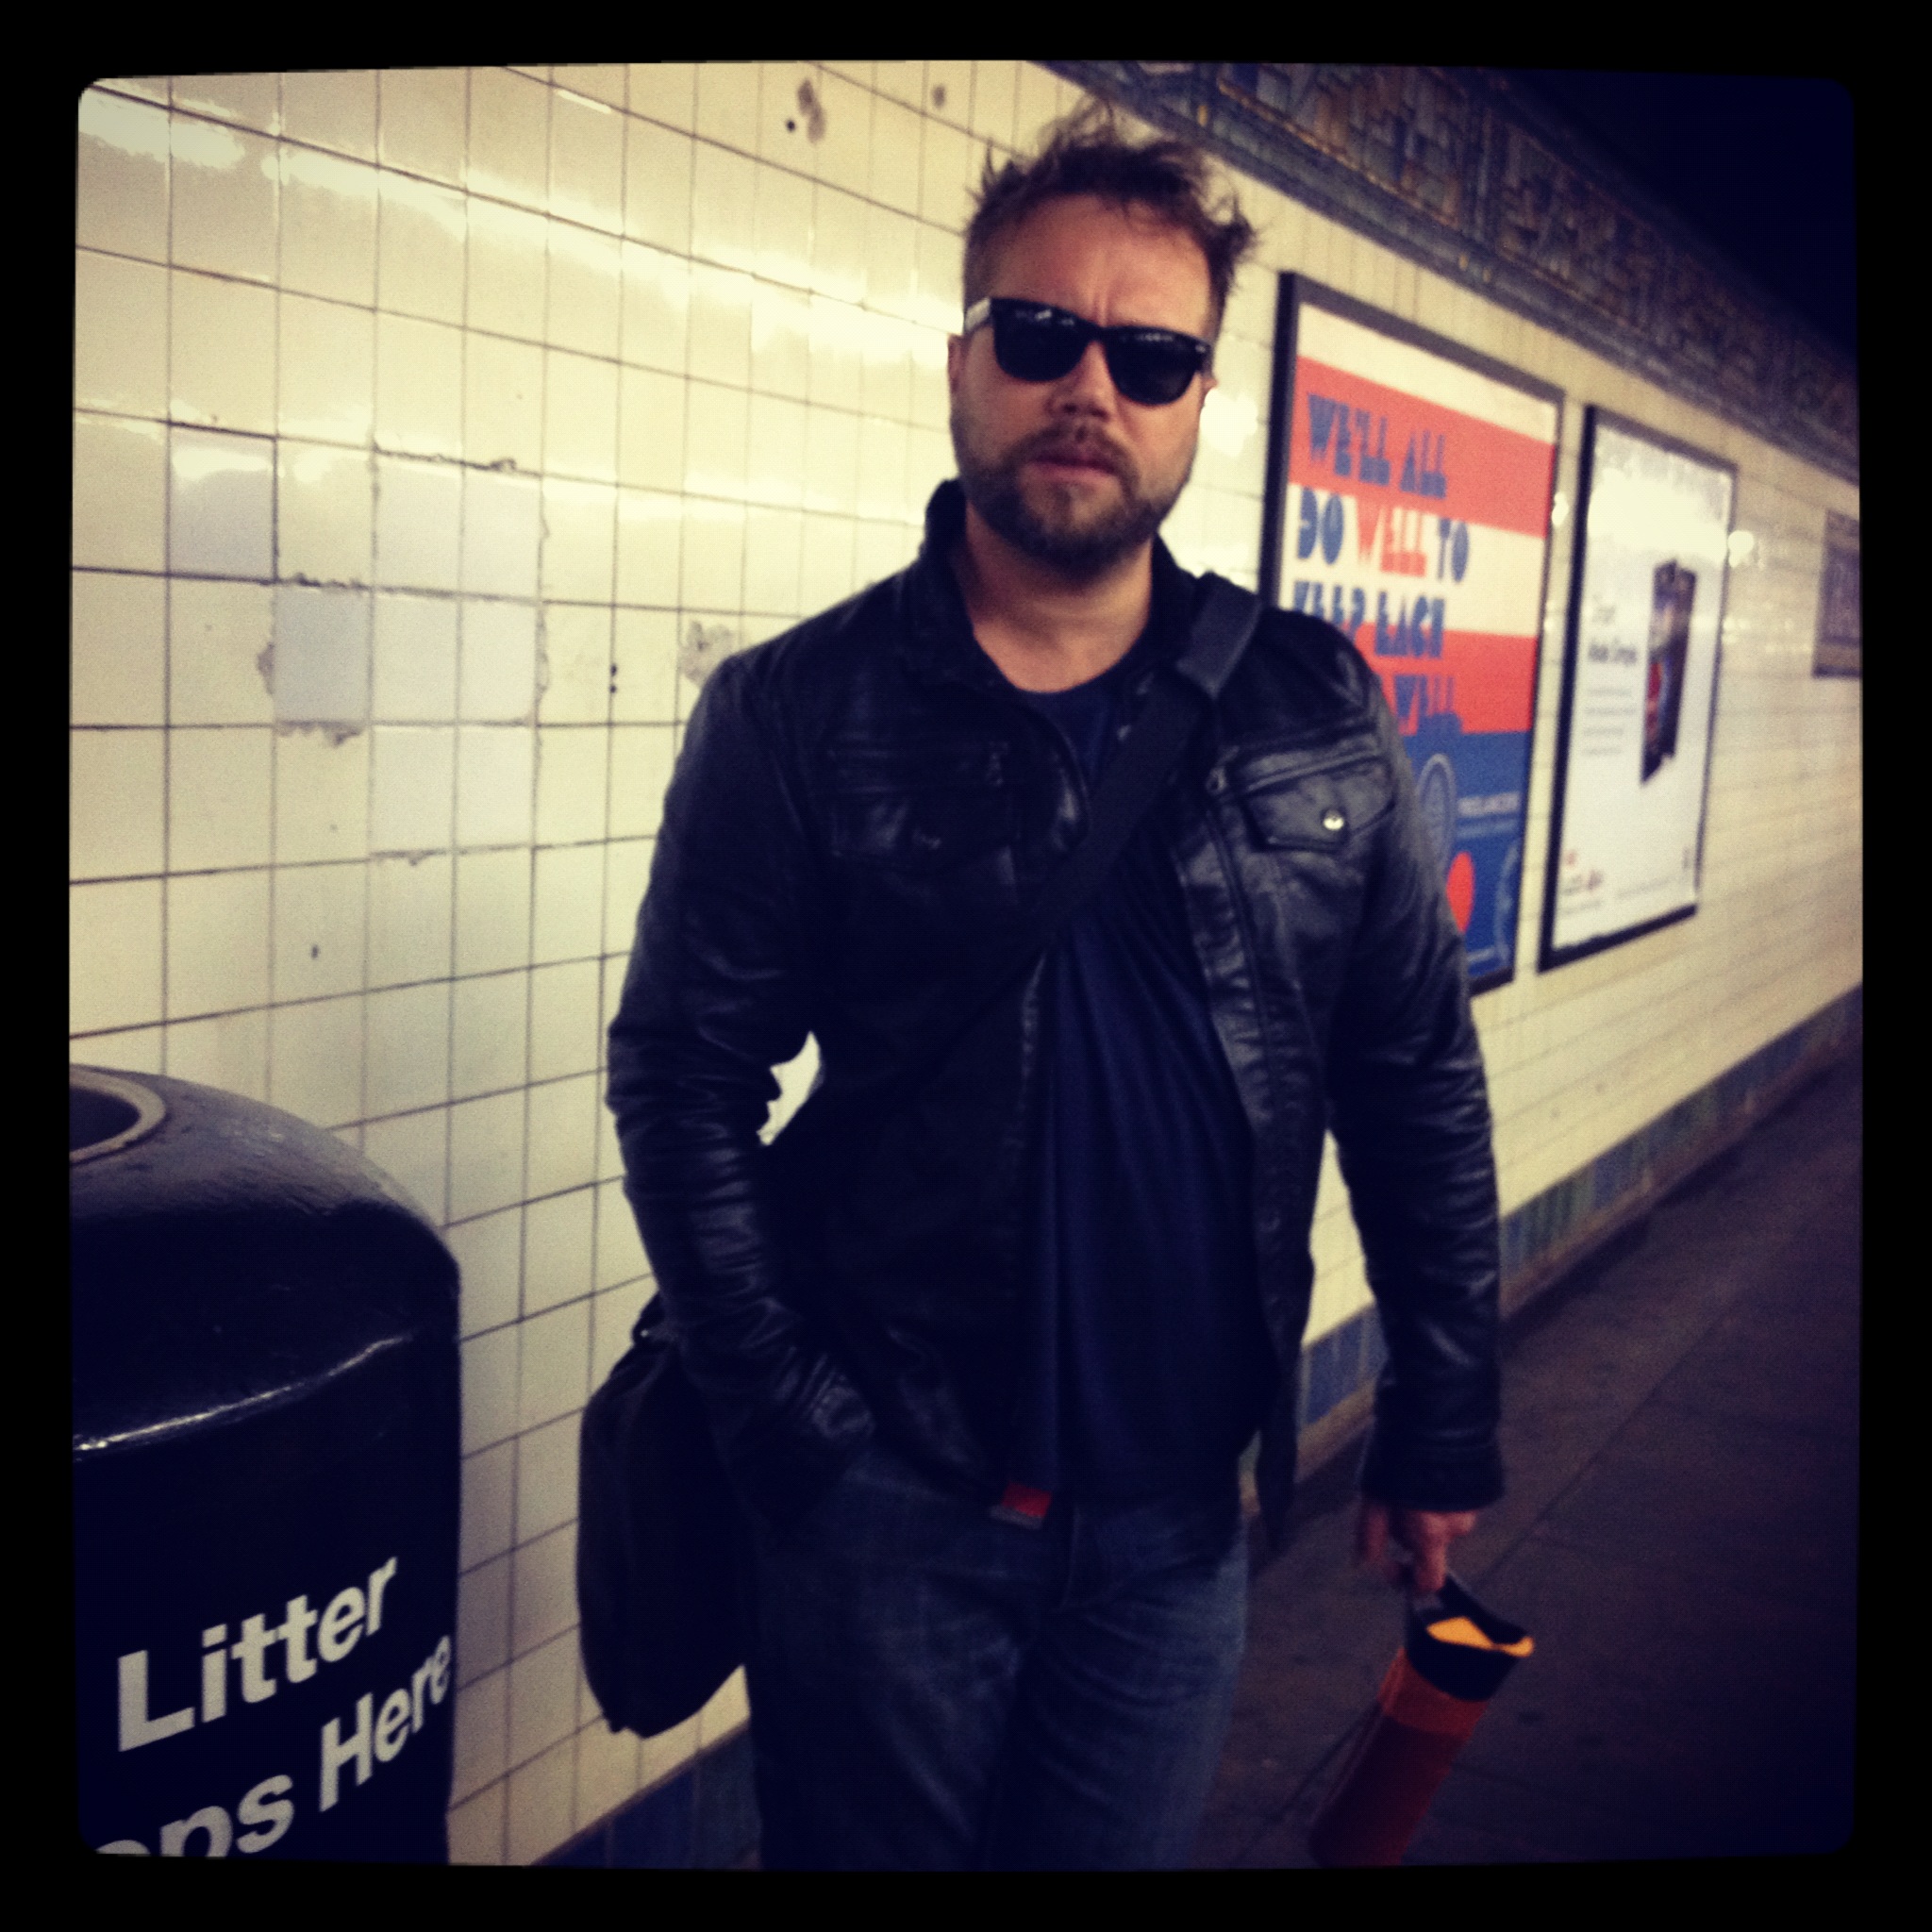 On Location in NYC subways filming / directing BROTHER music video - Brooklyn, NY